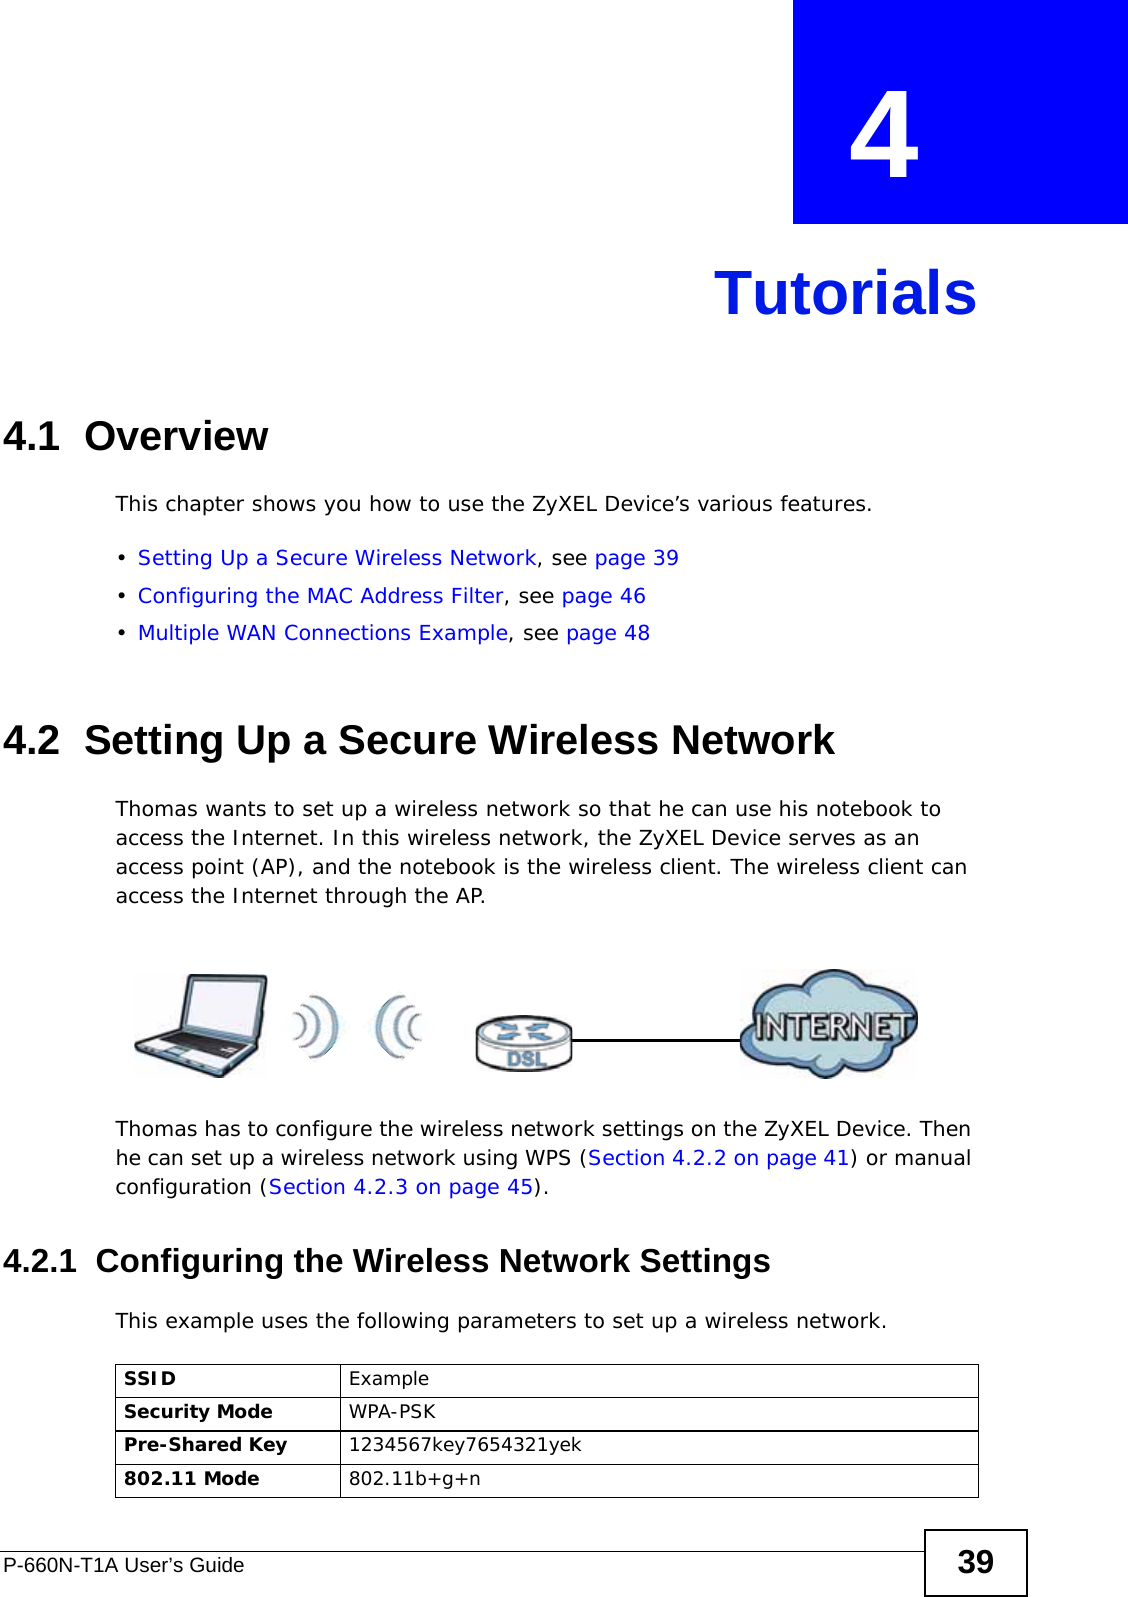 P-660N-T1A User’s Guide 39CHAPTER  4 Tutorials4.1  OverviewThis chapter shows you how to use the ZyXEL Device’s various features.•Setting Up a Secure Wireless Network, see page 39•Configuring the MAC Address Filter, see page 46•Multiple WAN Connections Example, see page 484.2  Setting Up a Secure Wireless NetworkThomas wants to set up a wireless network so that he can use his notebook to access the Internet. In this wireless network, the ZyXEL Device serves as an access point (AP), and the notebook is the wireless client. The wireless client can access the Internet through the AP.Thomas has to configure the wireless network settings on the ZyXEL Device. Then he can set up a wireless network using WPS (Section 4.2.2 on page 41) or manual configuration (Section 4.2.3 on page 45).4.2.1  Configuring the Wireless Network SettingsThis example uses the following parameters to set up a wireless network.SSID ExampleSecurity Mode WPA-PSKPre-Shared Key 1234567key7654321yek802.11 Mode 802.11b+g+n